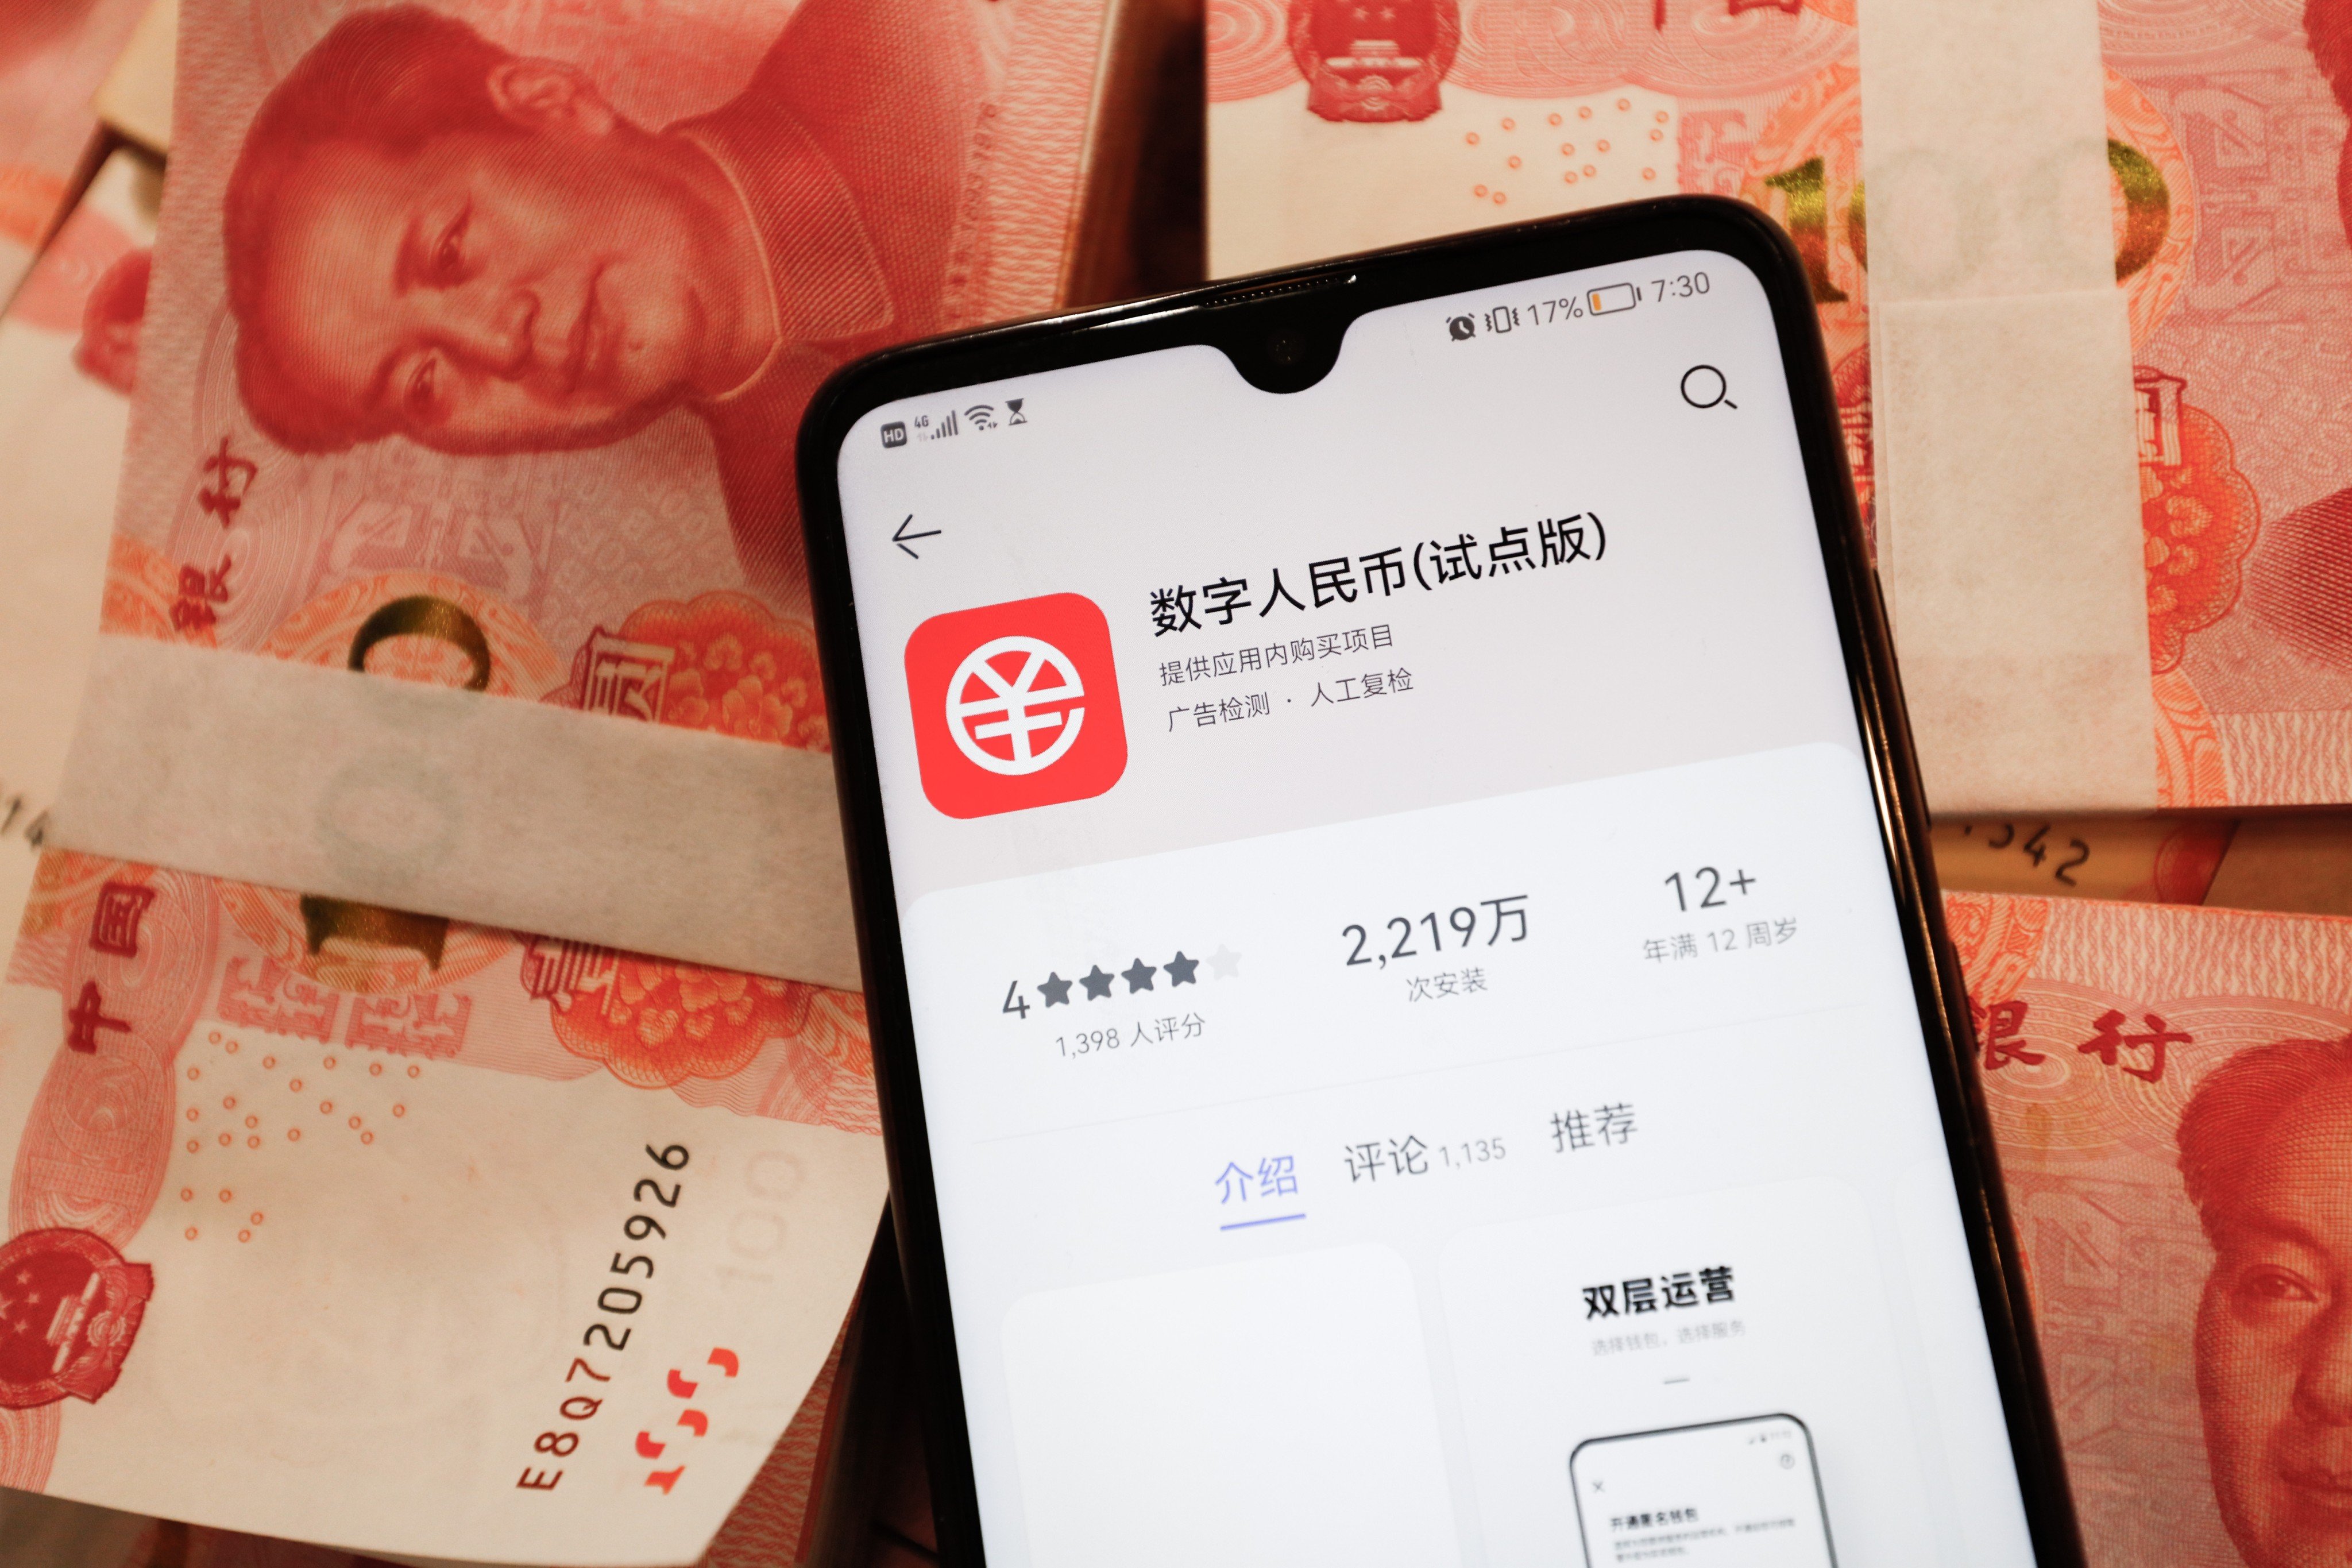 Ant Group CEO Eric Jing’s voice of support for the digital yuan came days after China’s central bank called on mobile payment platform operators to unify QR codes. Photo: Shutterstock